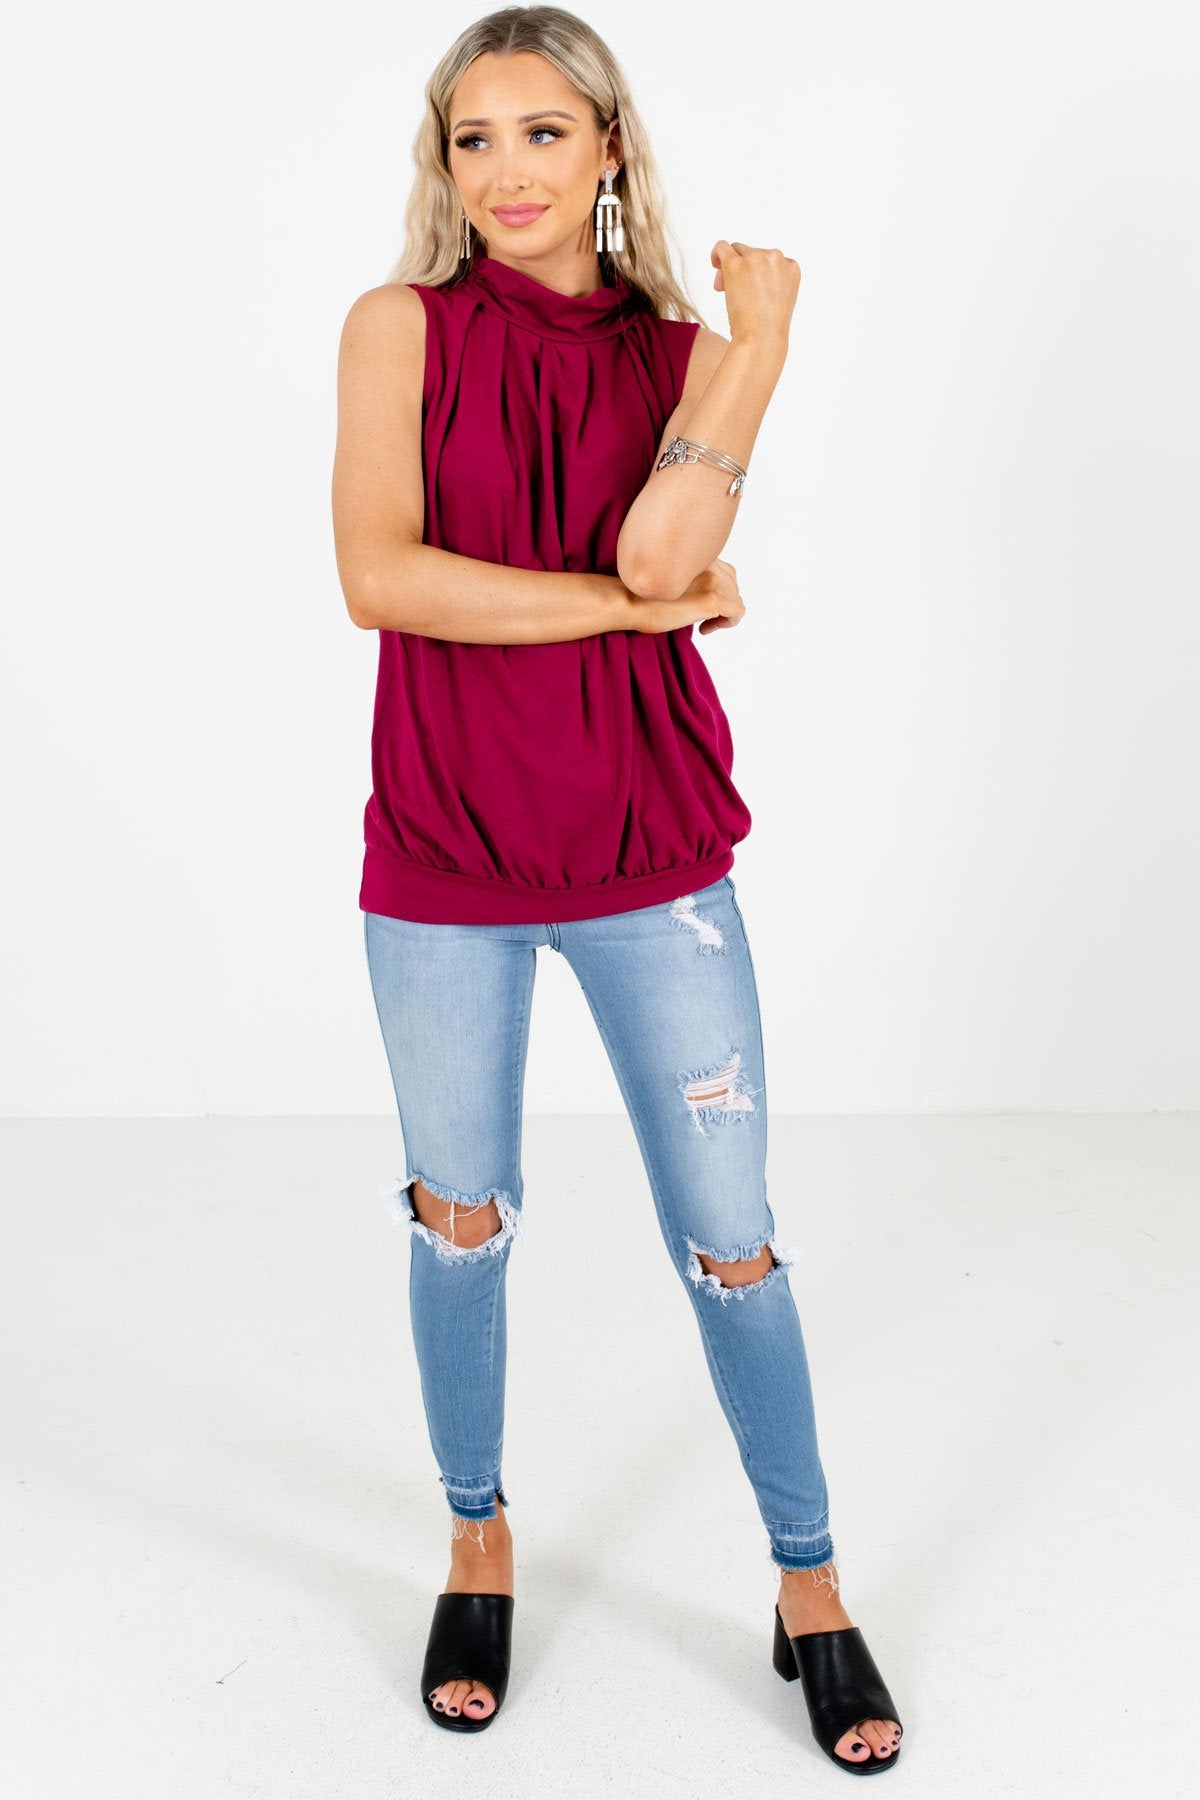 Women’s Wine Red Spring and Summertime Boutique Clothing